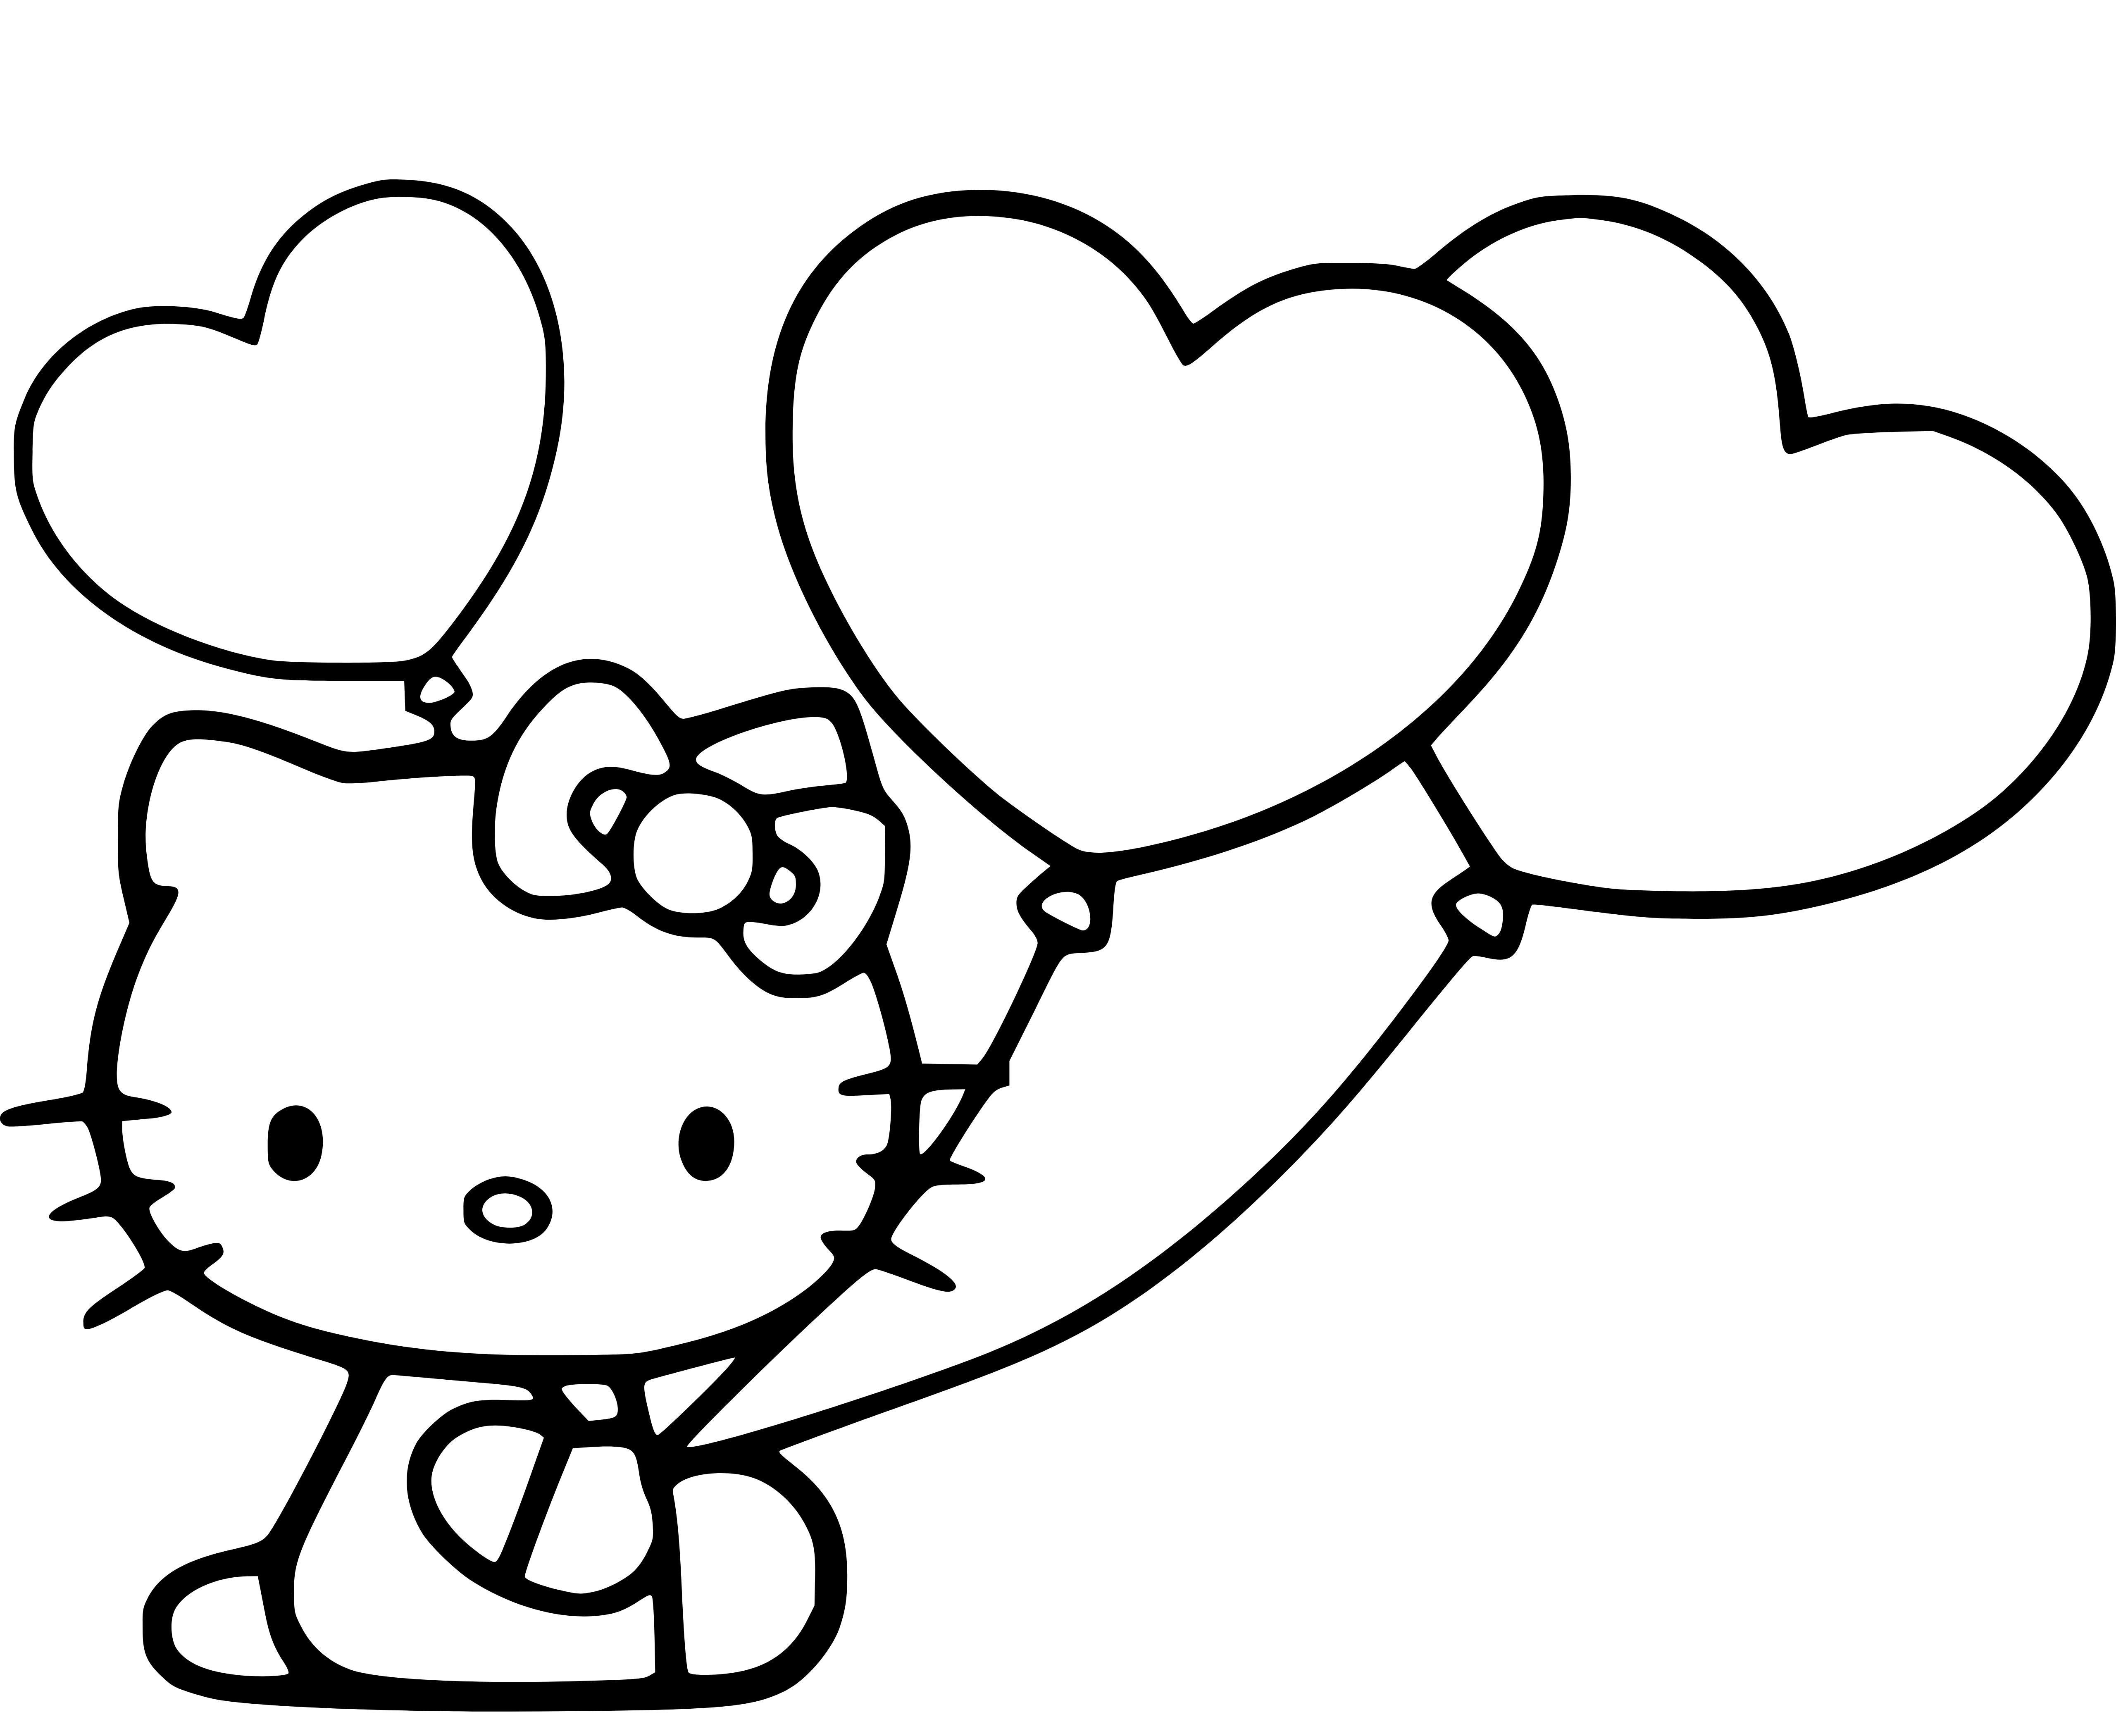 Printable Kitty with balloons Coloring Page for kids.